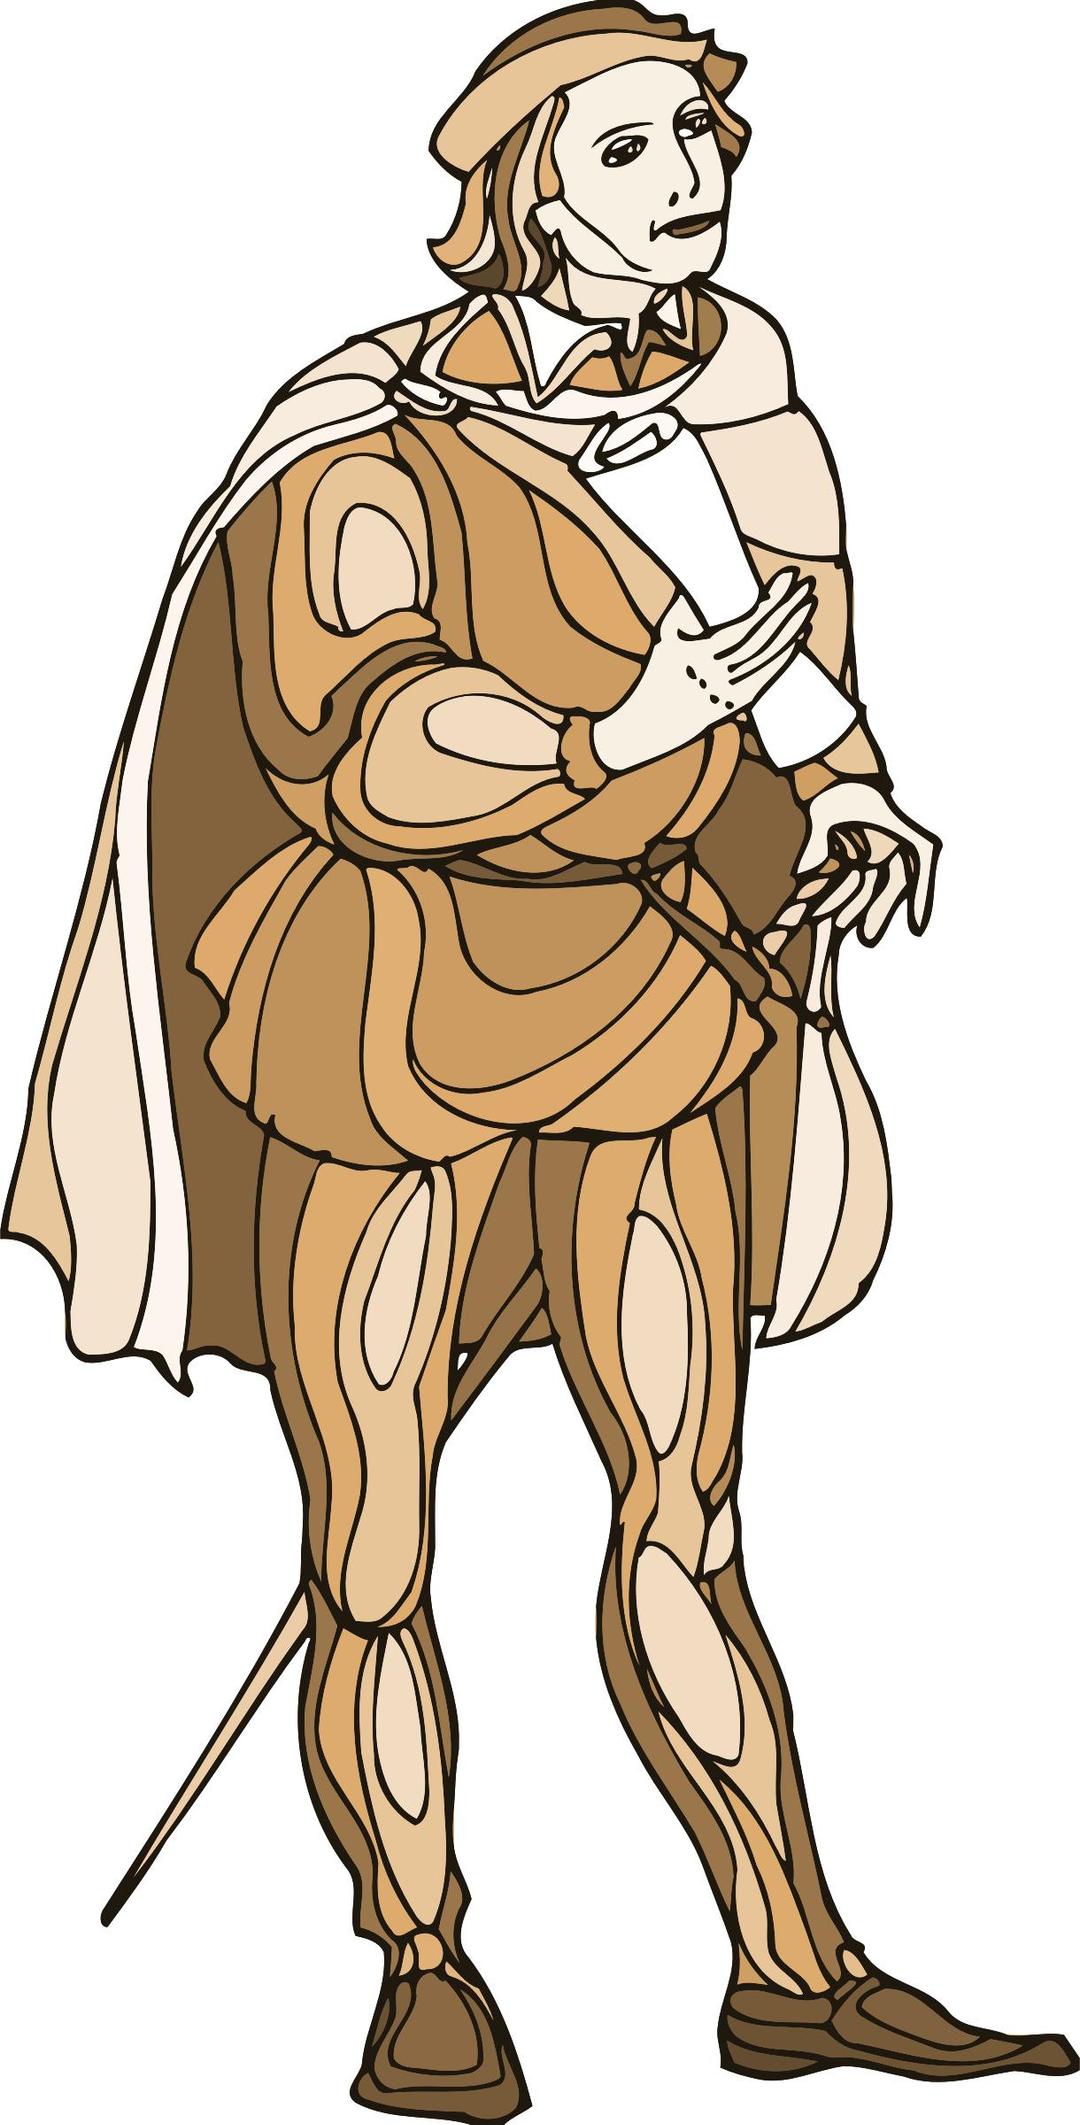 Shakespeare characters - Cornely png transparent